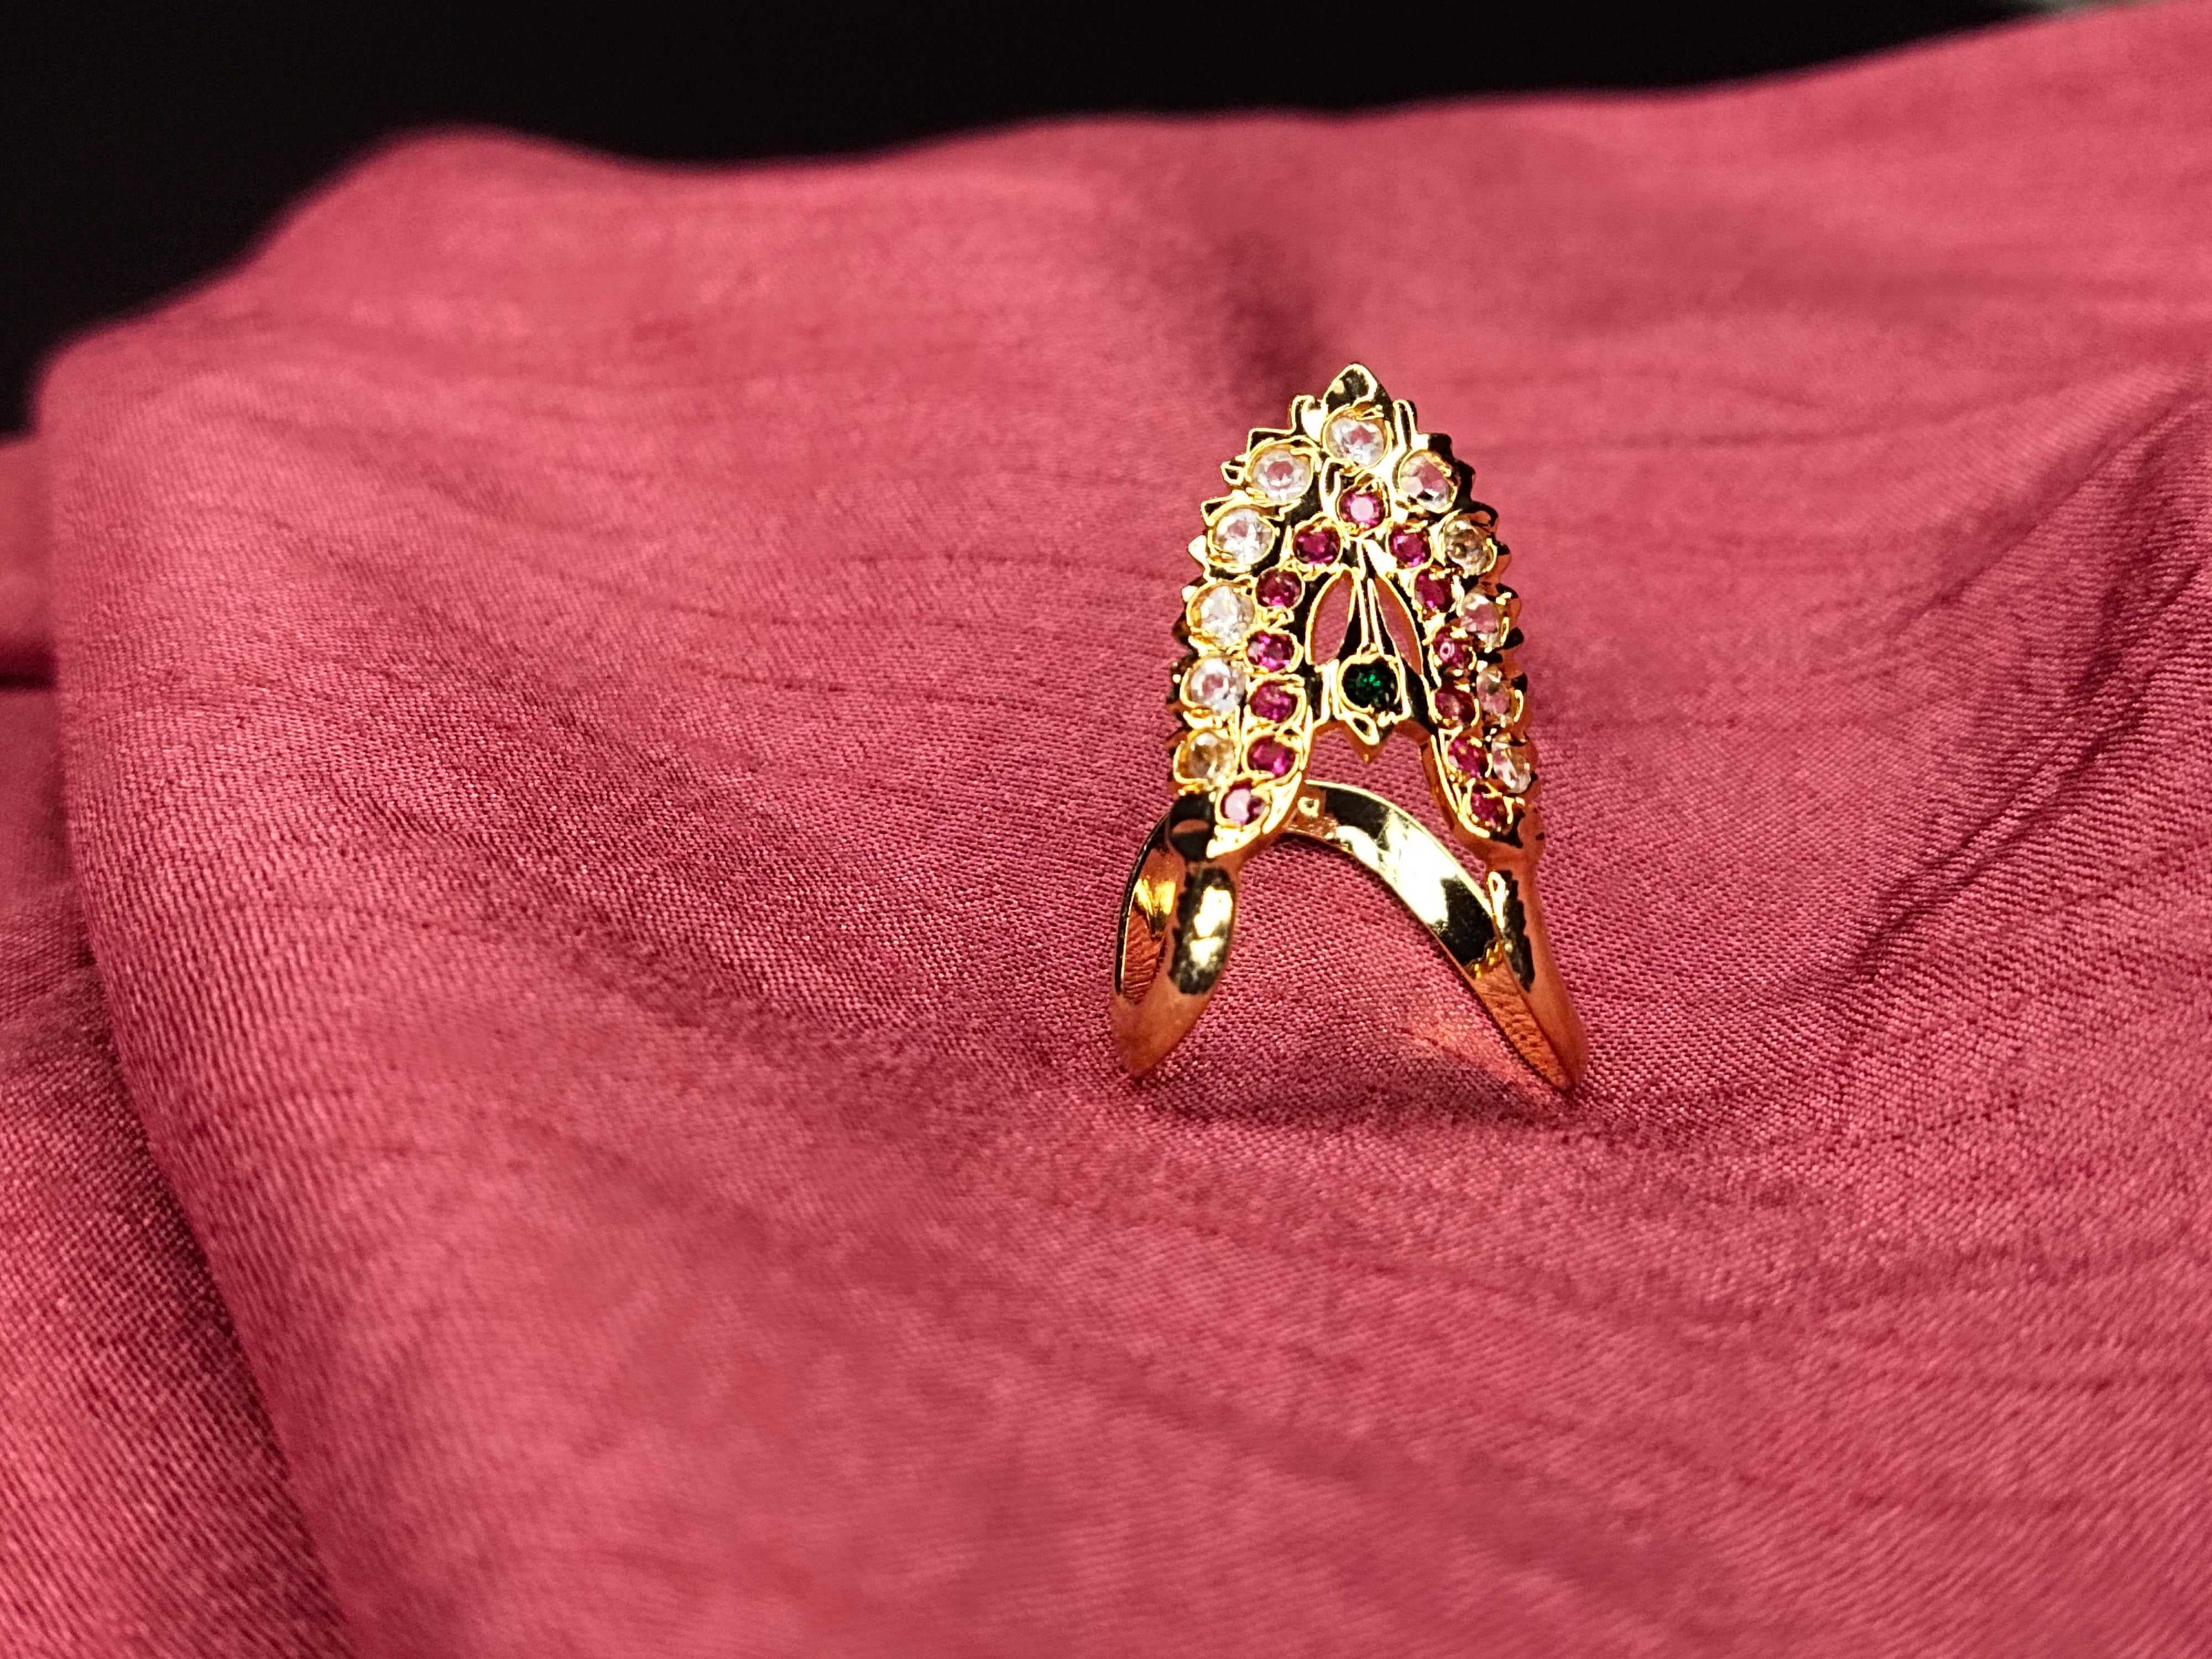 Vanki ring | Gold ring designs, Gold jewelry fashion, Gold jewelry stores